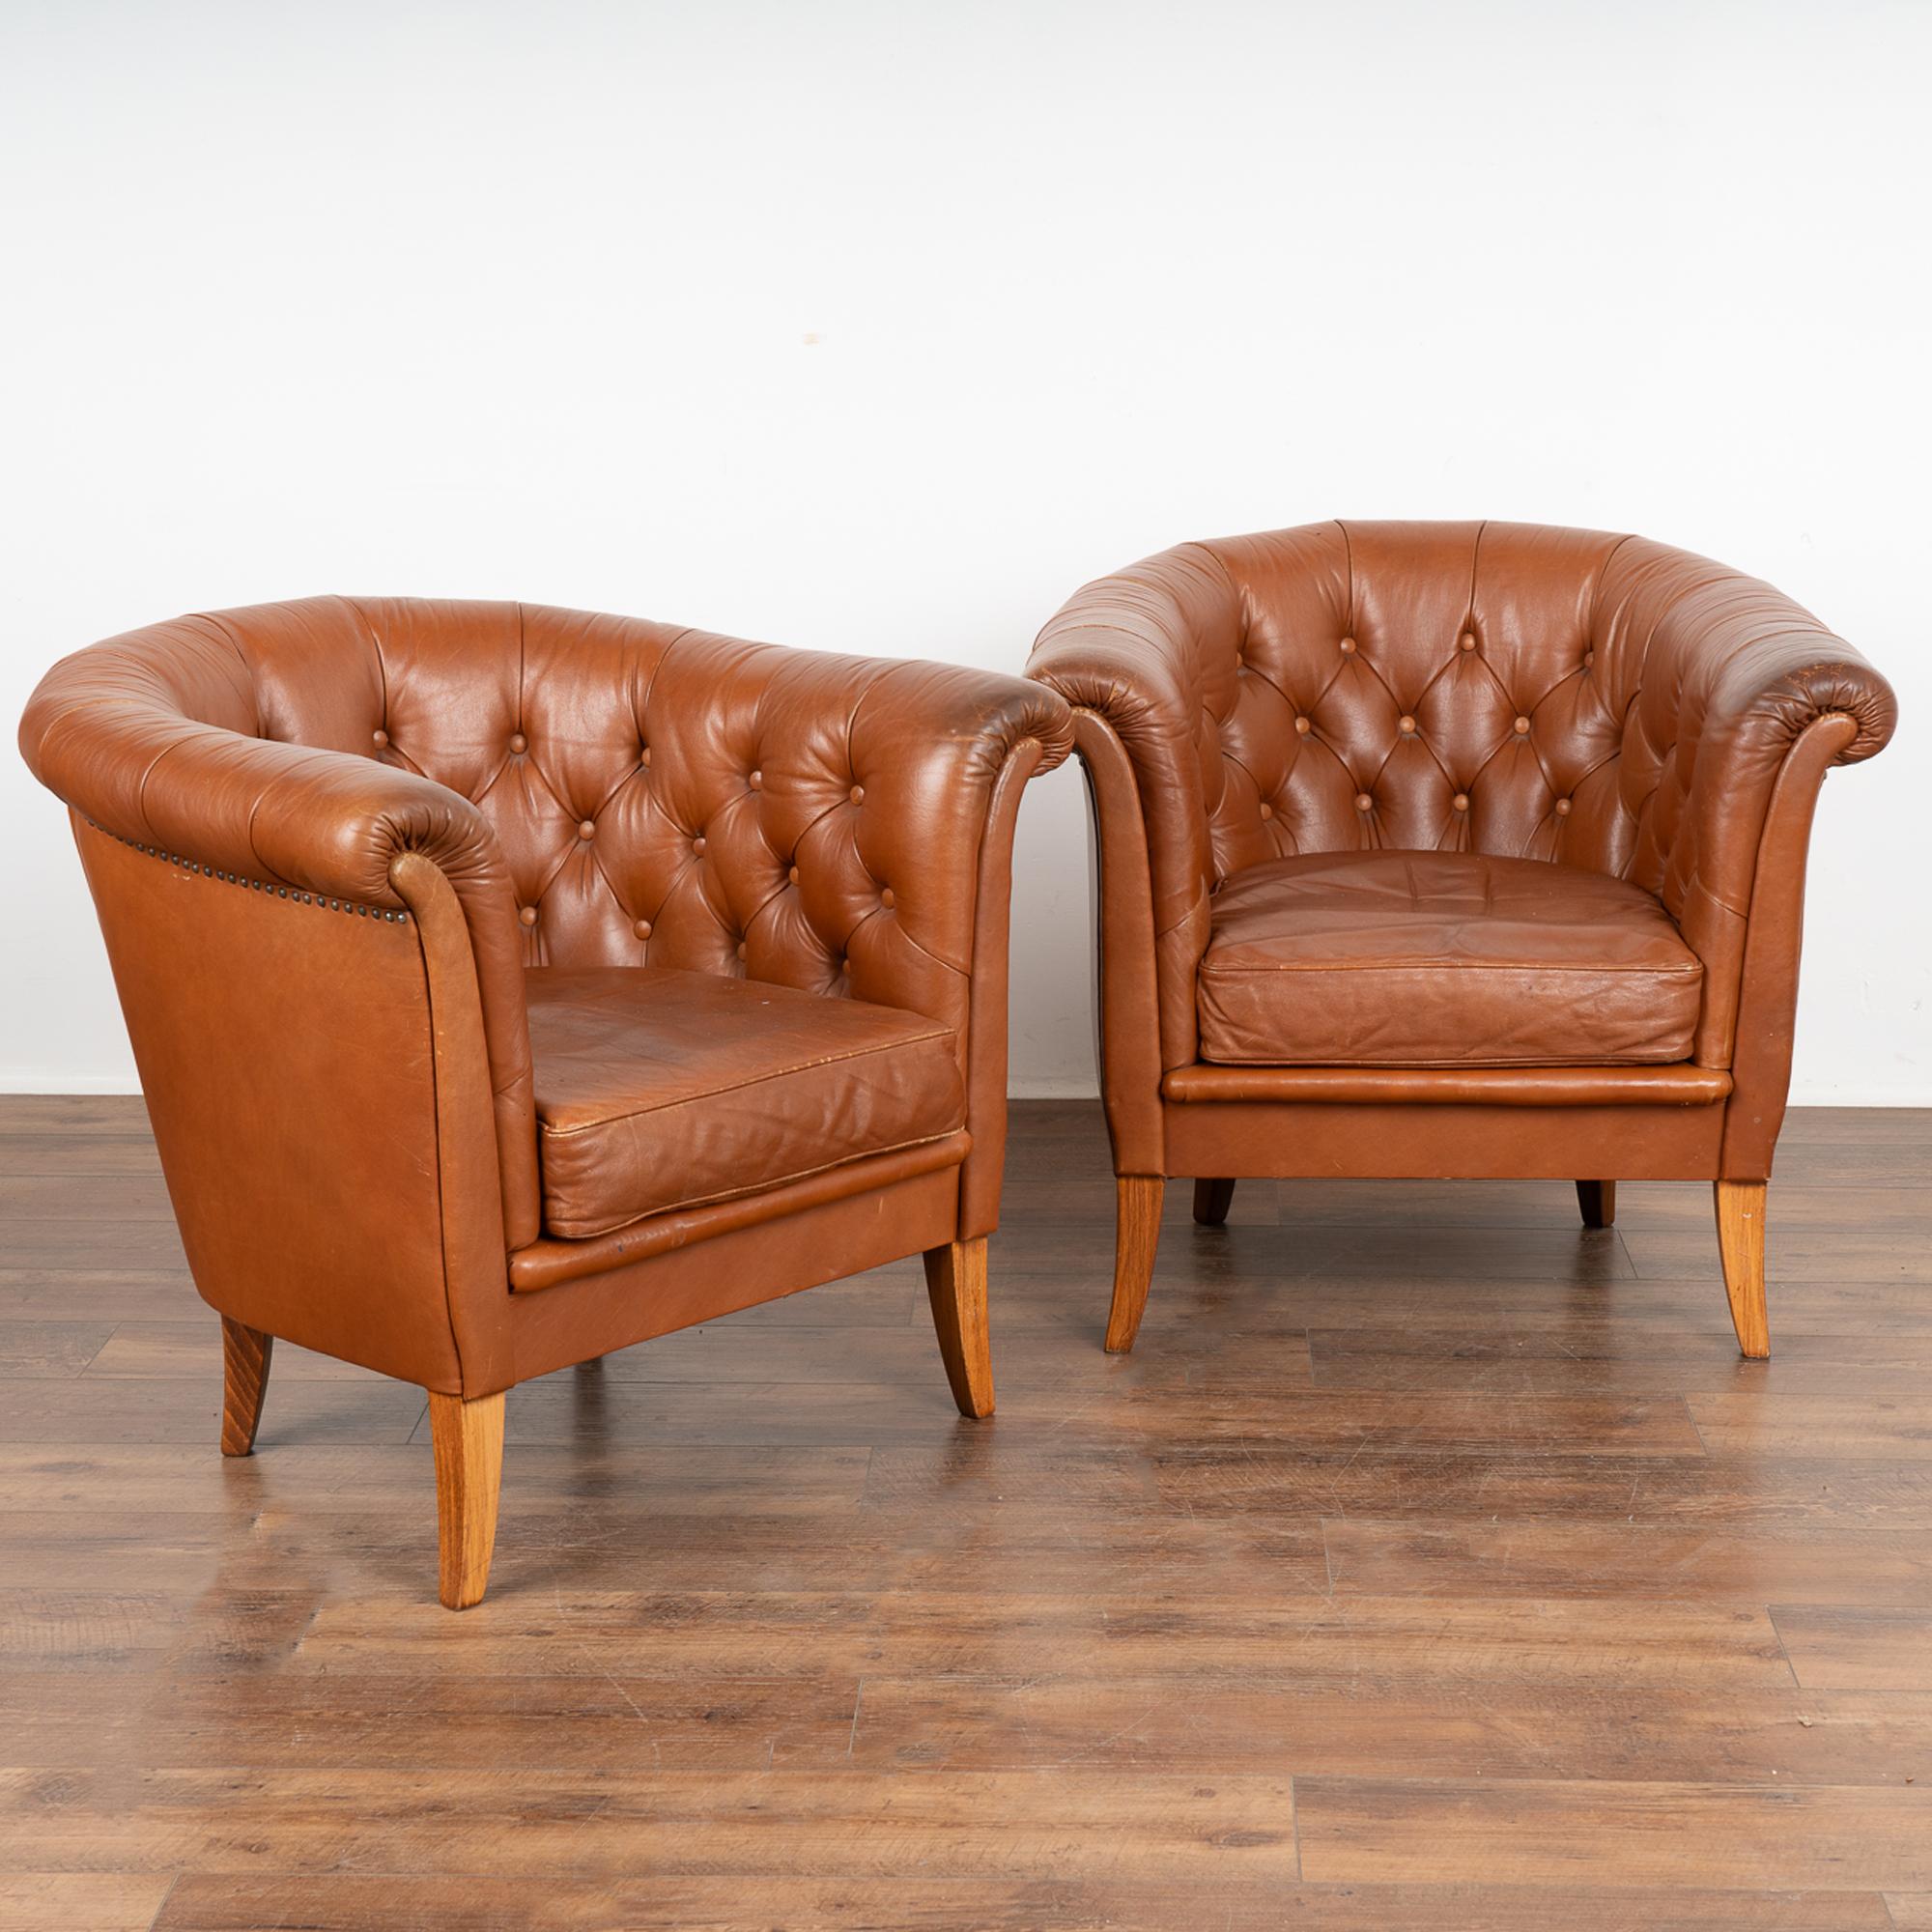 Pair, brown leather barrel back arm chairs with hard wood legs.
Upholstered club chairs in button-tufted cognac leather, slender rolled arms with nail head trim underneath.
Sits low; sold in original vintage condition. Typical age related wear